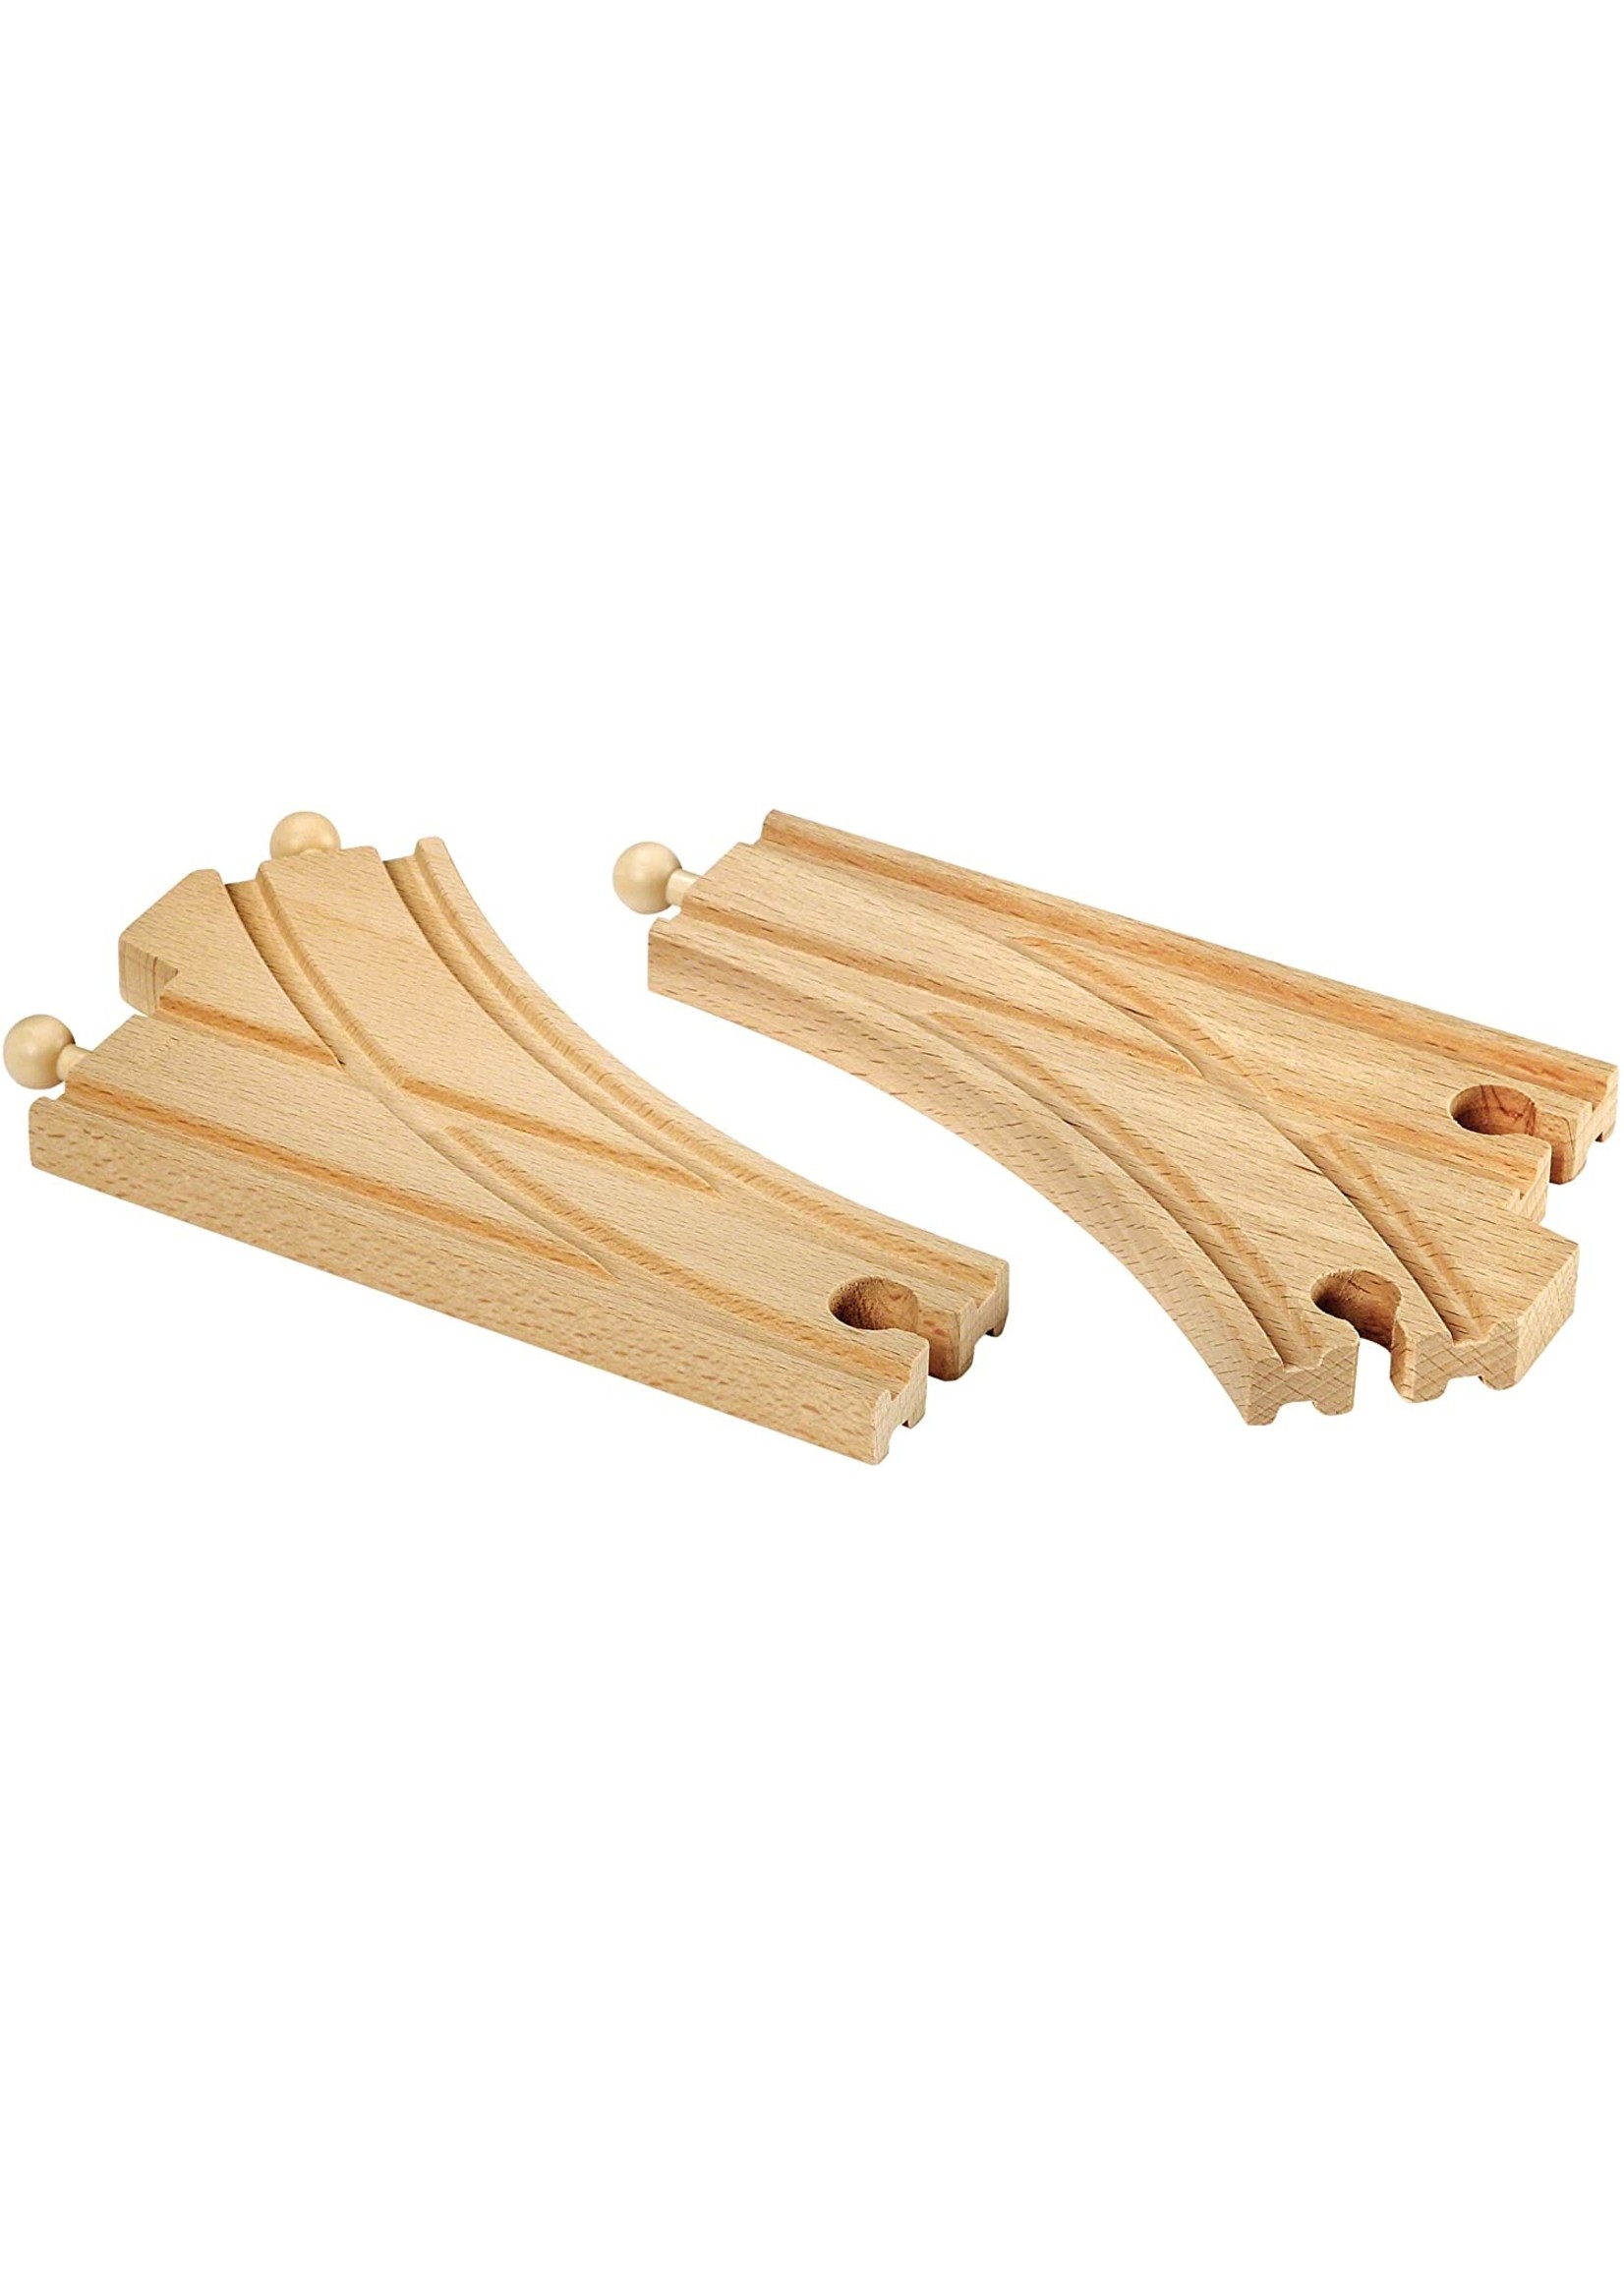 Brio 33346 - Curved Switching Tracks